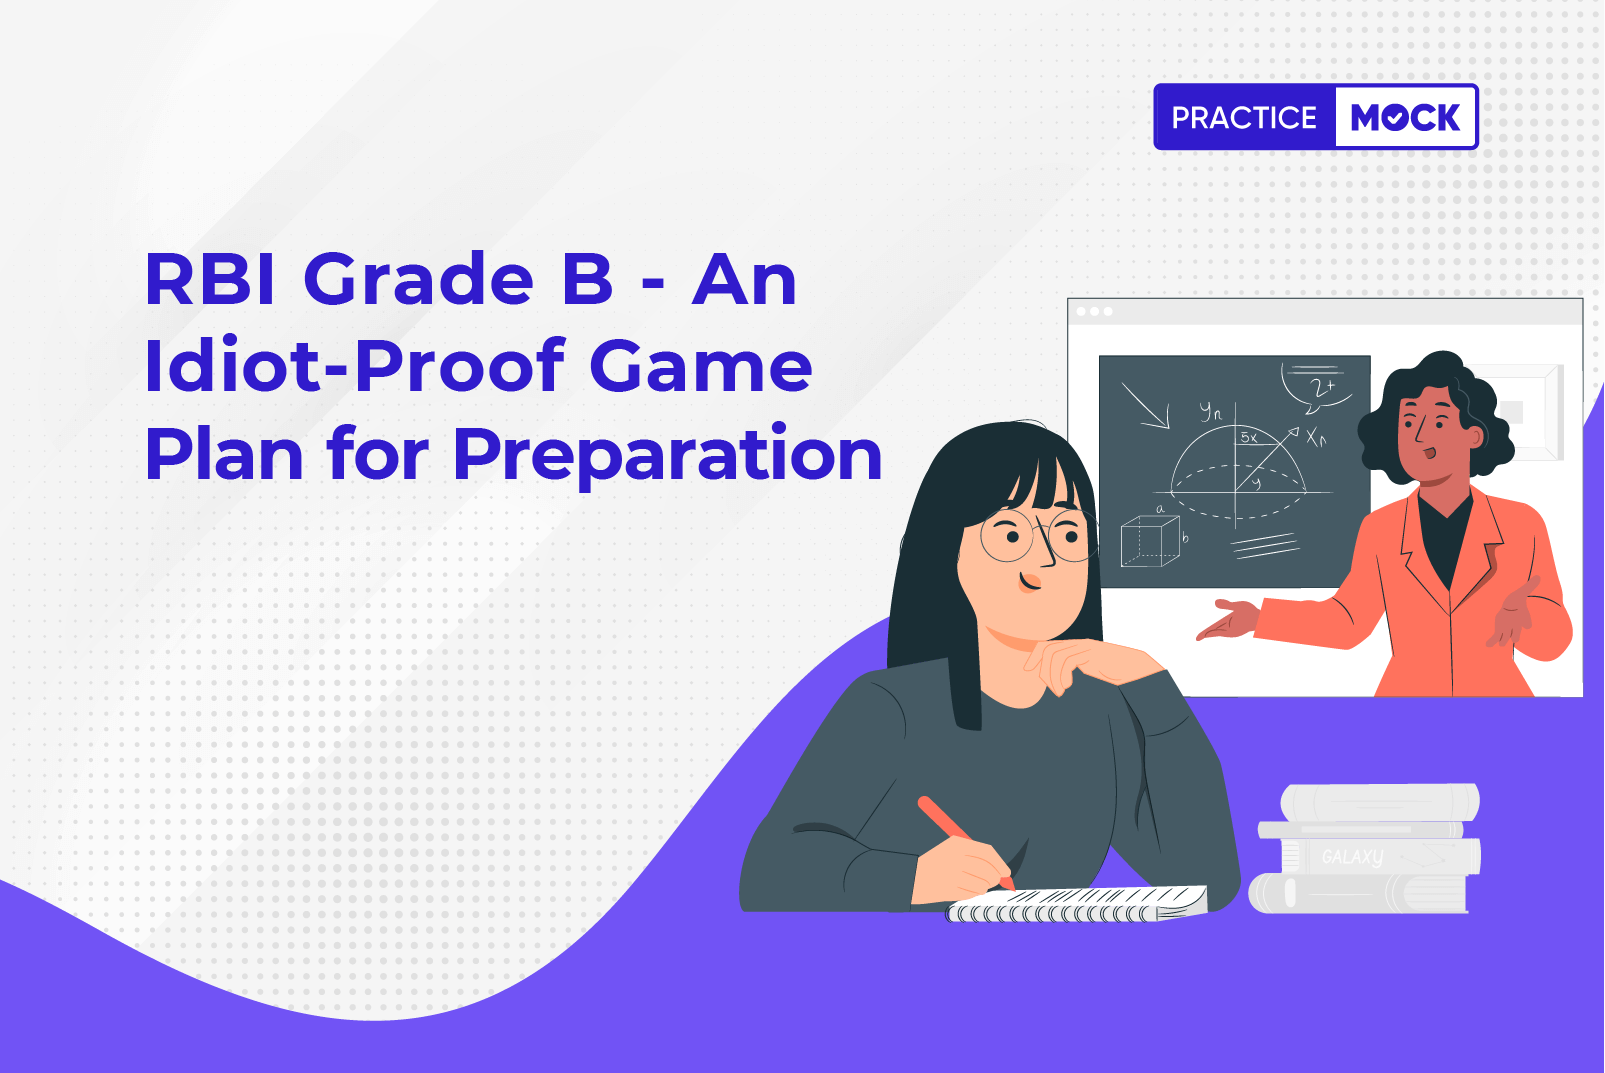 RBI Grade B - An Idiot-Proof Game Plan for Preparation